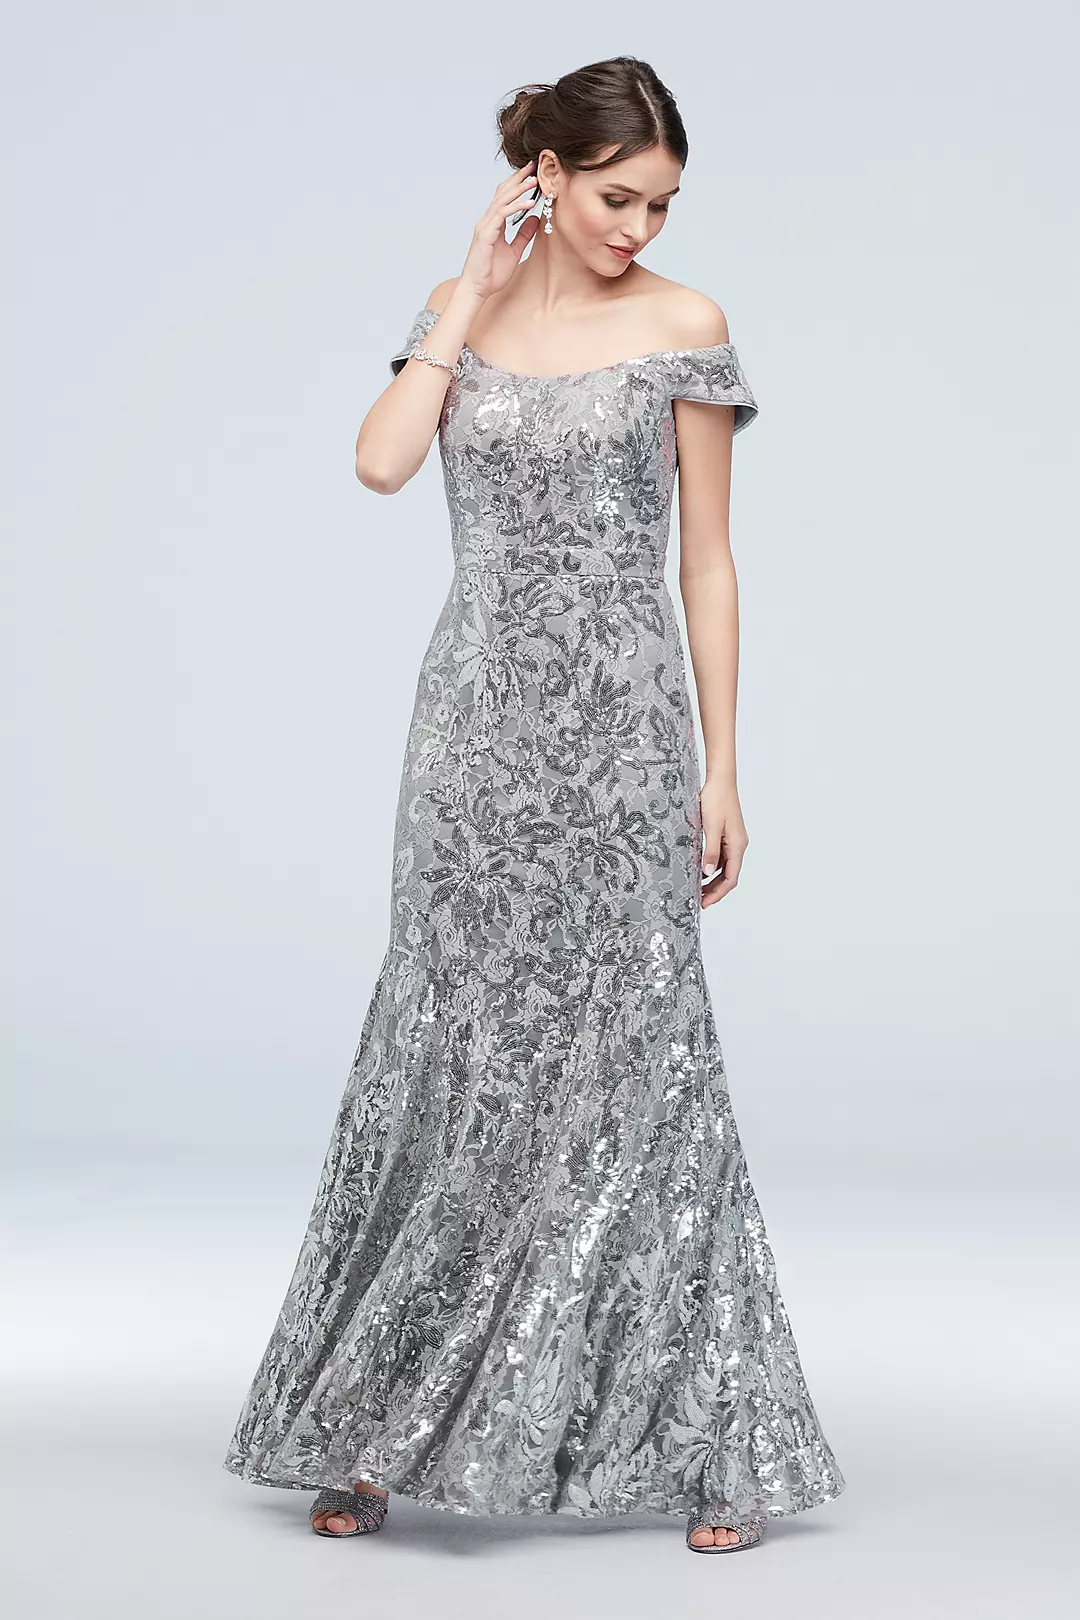 Sequin Lace Off-the-Shoulder Mermaid Gown Image